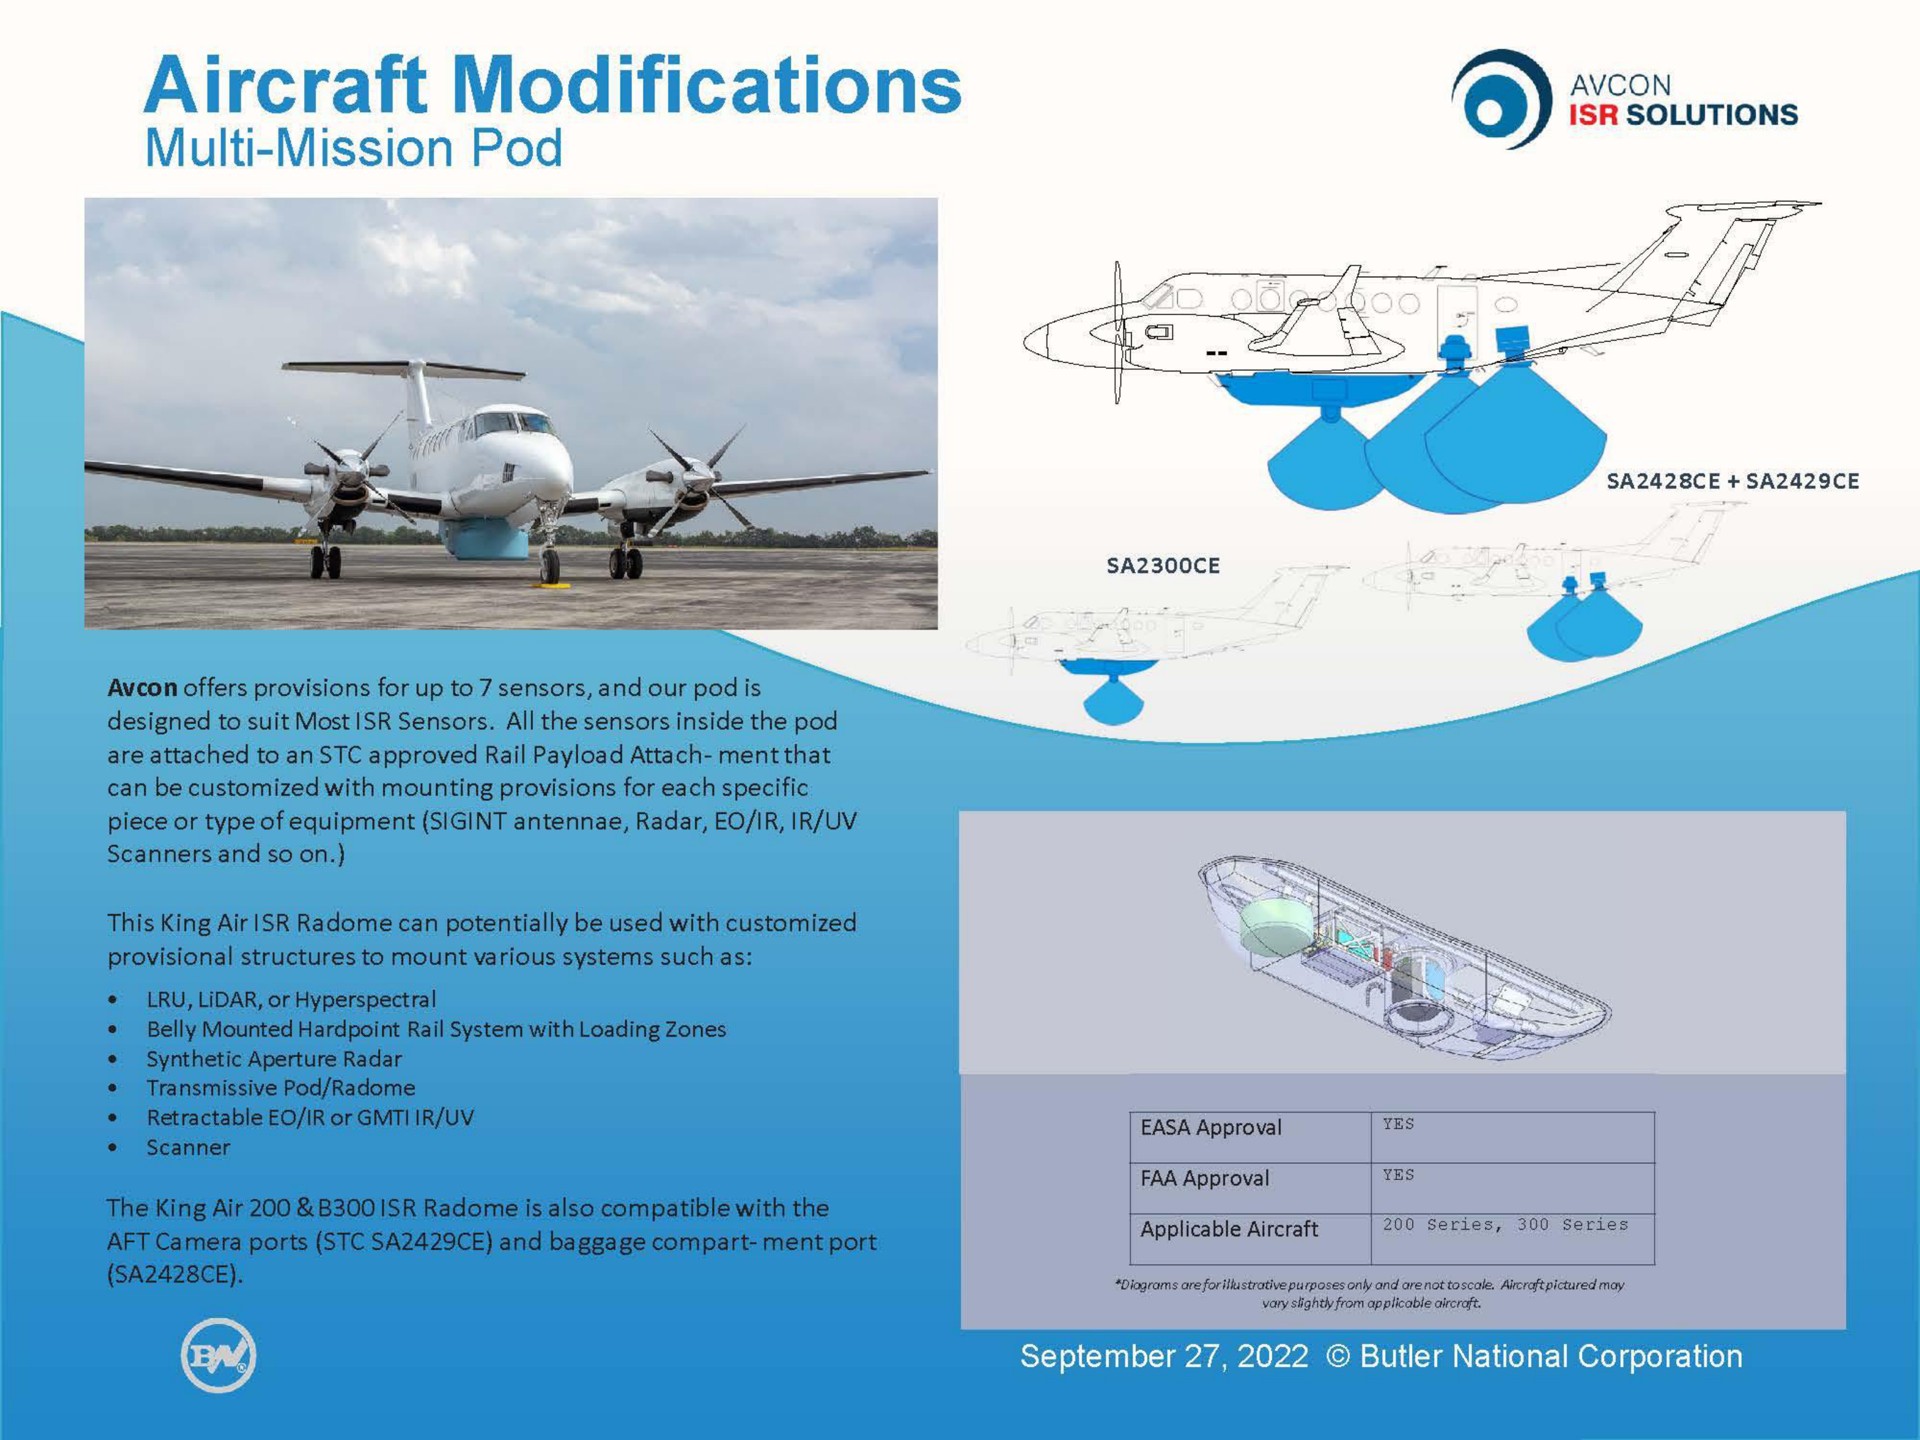 aircraft modifications | Butler National Corporation